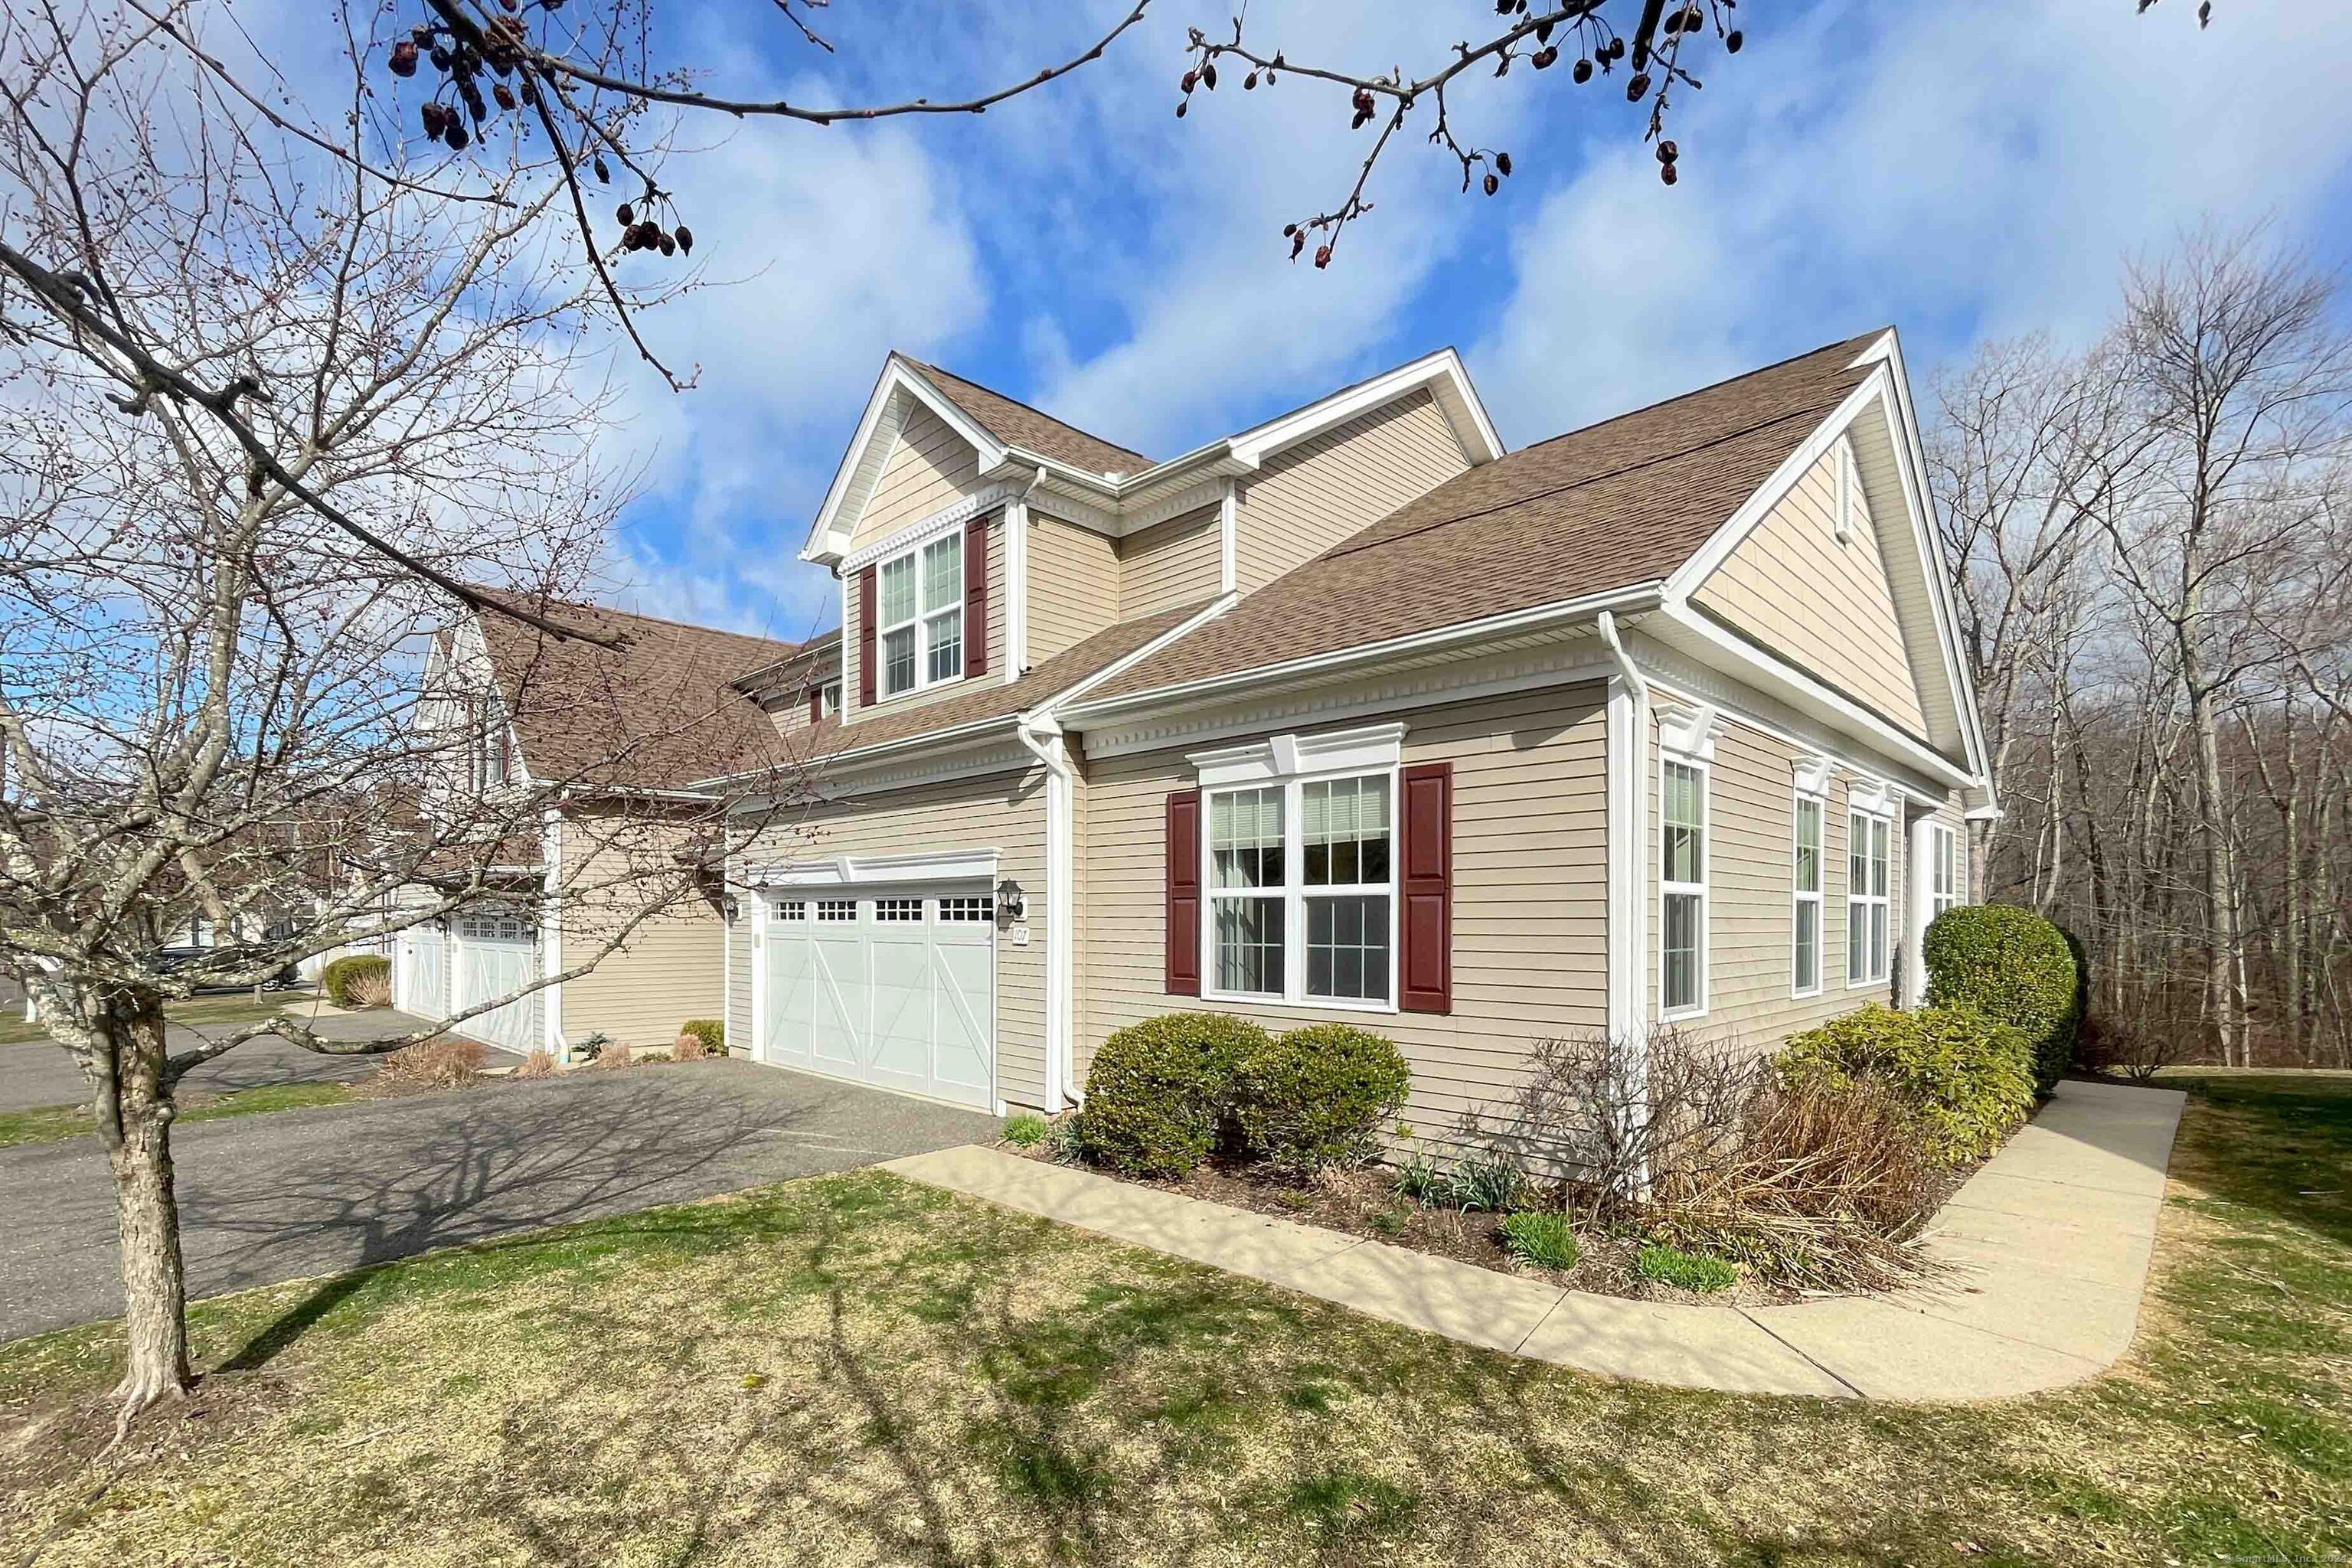 View Prospect, CT 06712 townhome